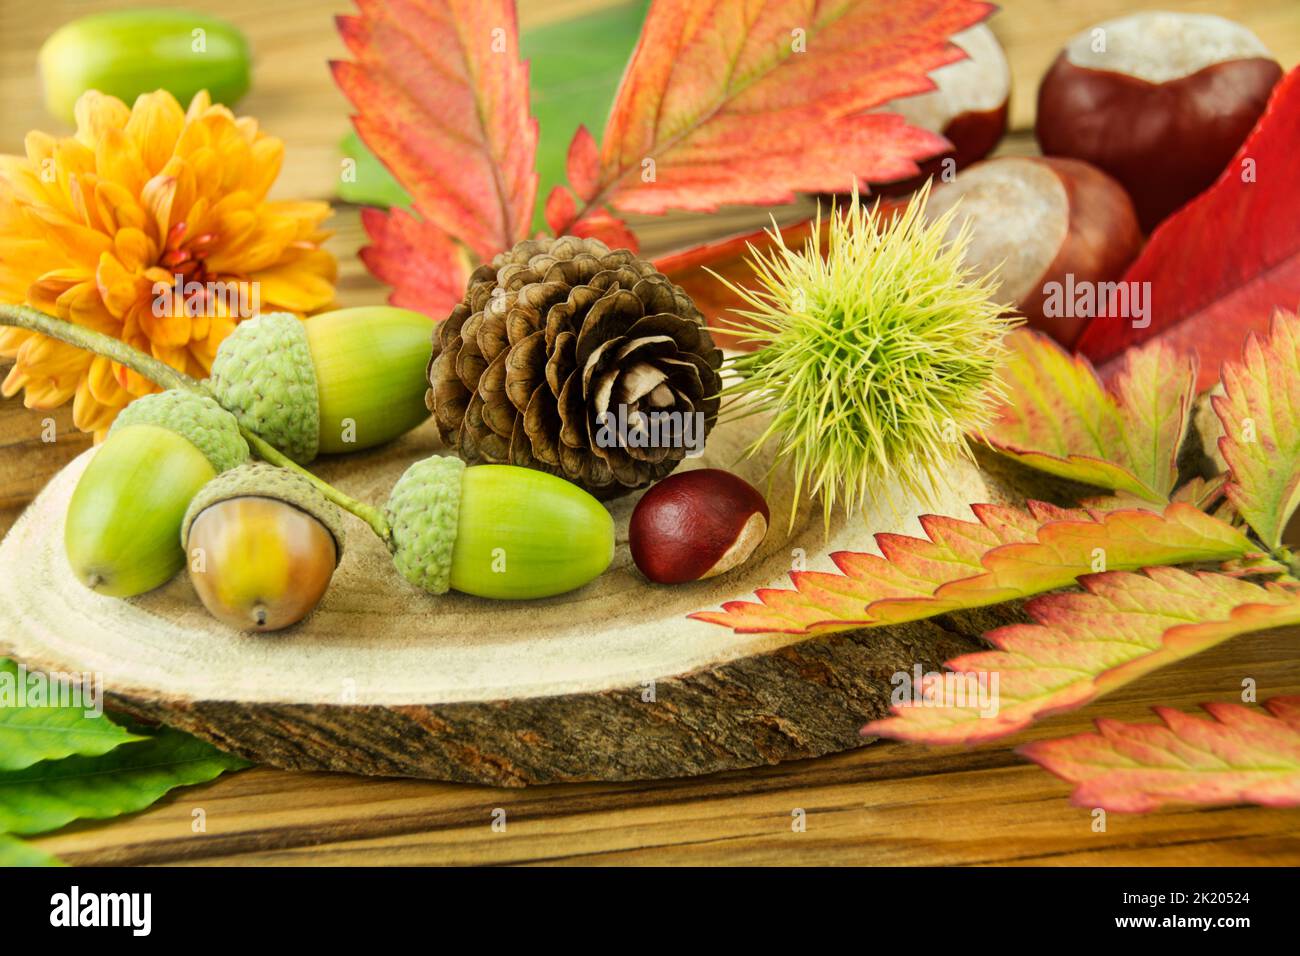 Autumn and natural decoration with chestnuts, leaves, marons and flowers on wooden background Stock Photo